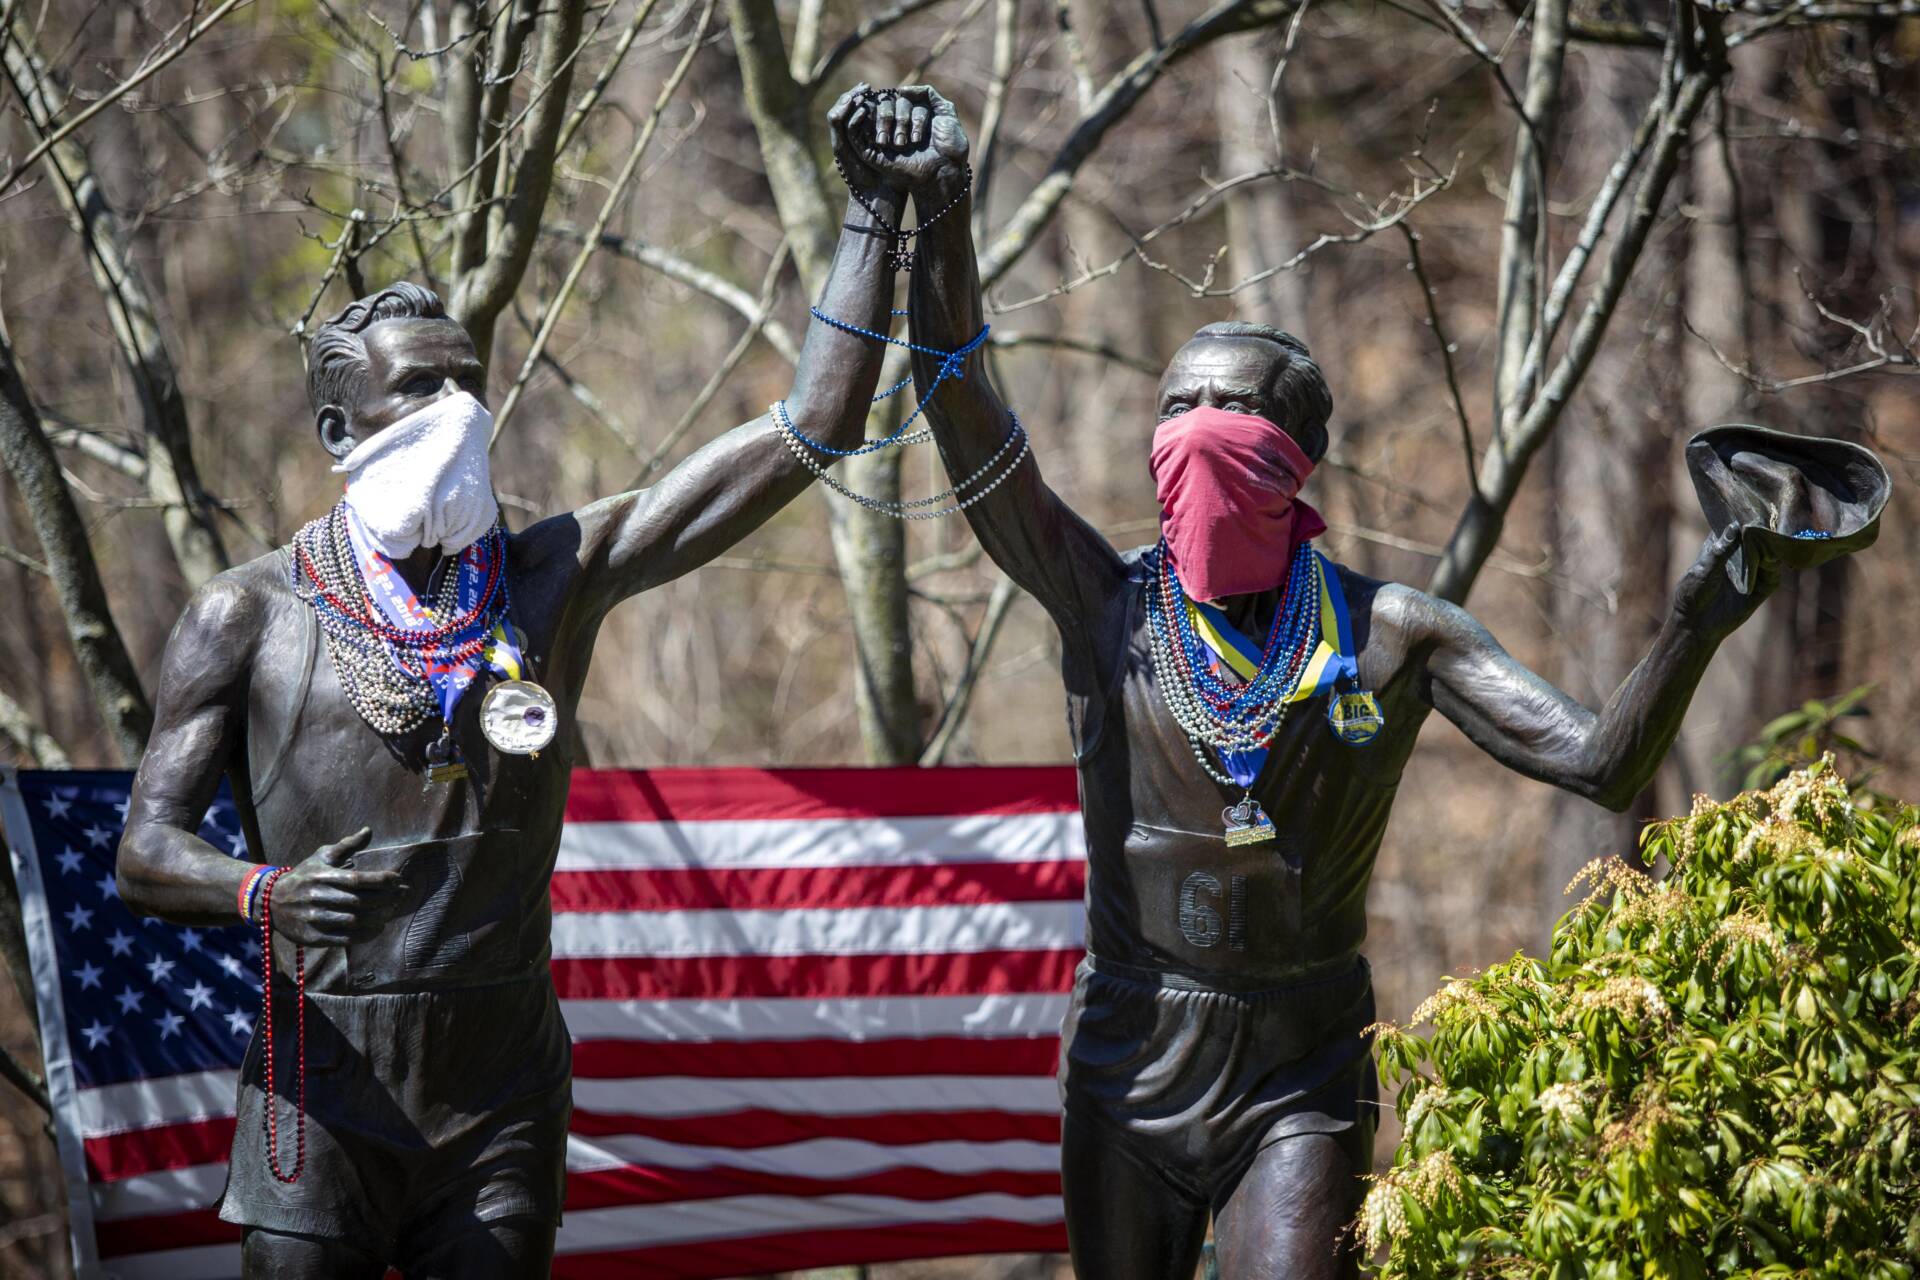 The two versions of marathon runner Johnny Kelley, aged 27 and 84, wear masks at the &quot;Young at Heart&quot; sculpture on Commonwealth Avenue in Newton. (Robin Lubbock/WBUR)